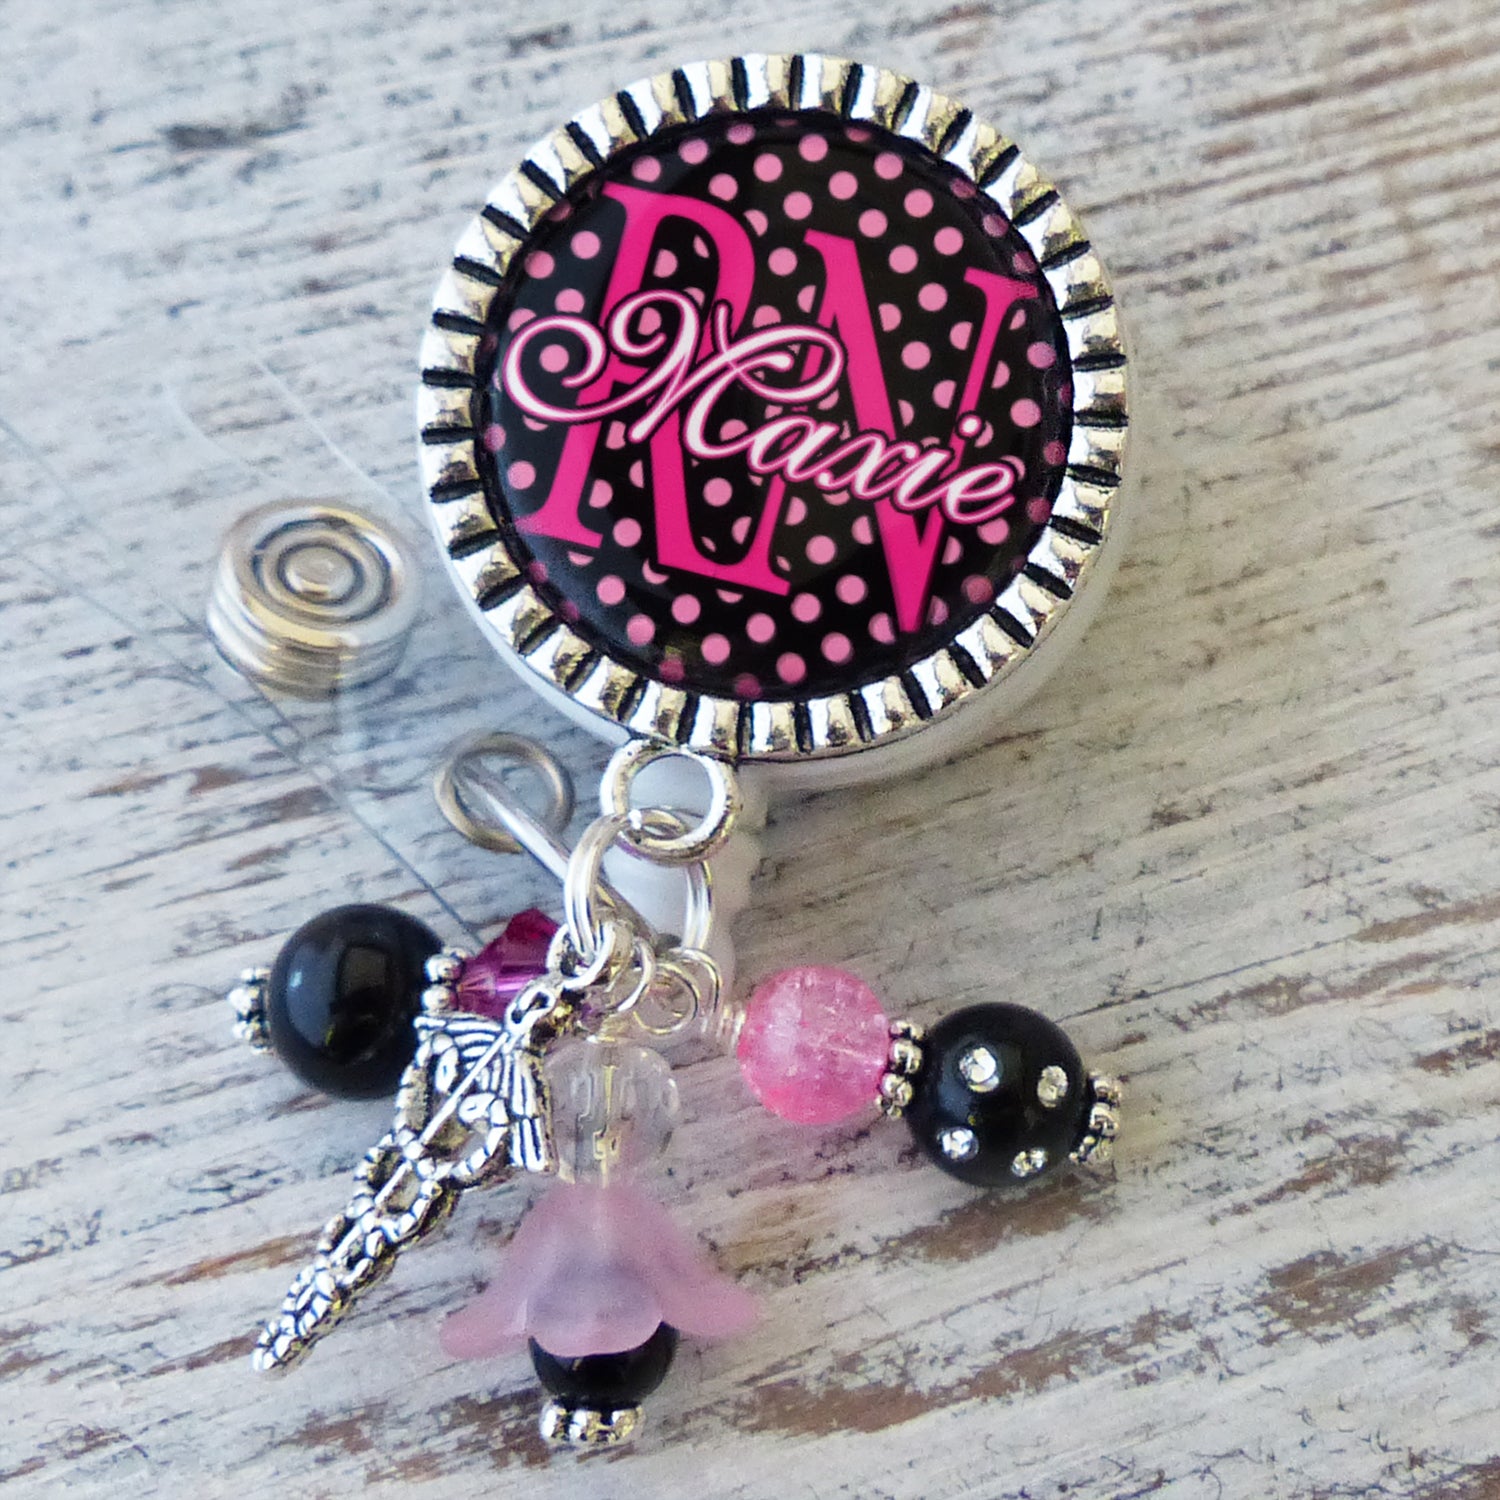 RN Badge Reel, Personalized ID Badges for Nurses, Polka-dots, NP, BSN, CNA, Retractable Holder with Name and Title, Nurse Gifts, Graduation